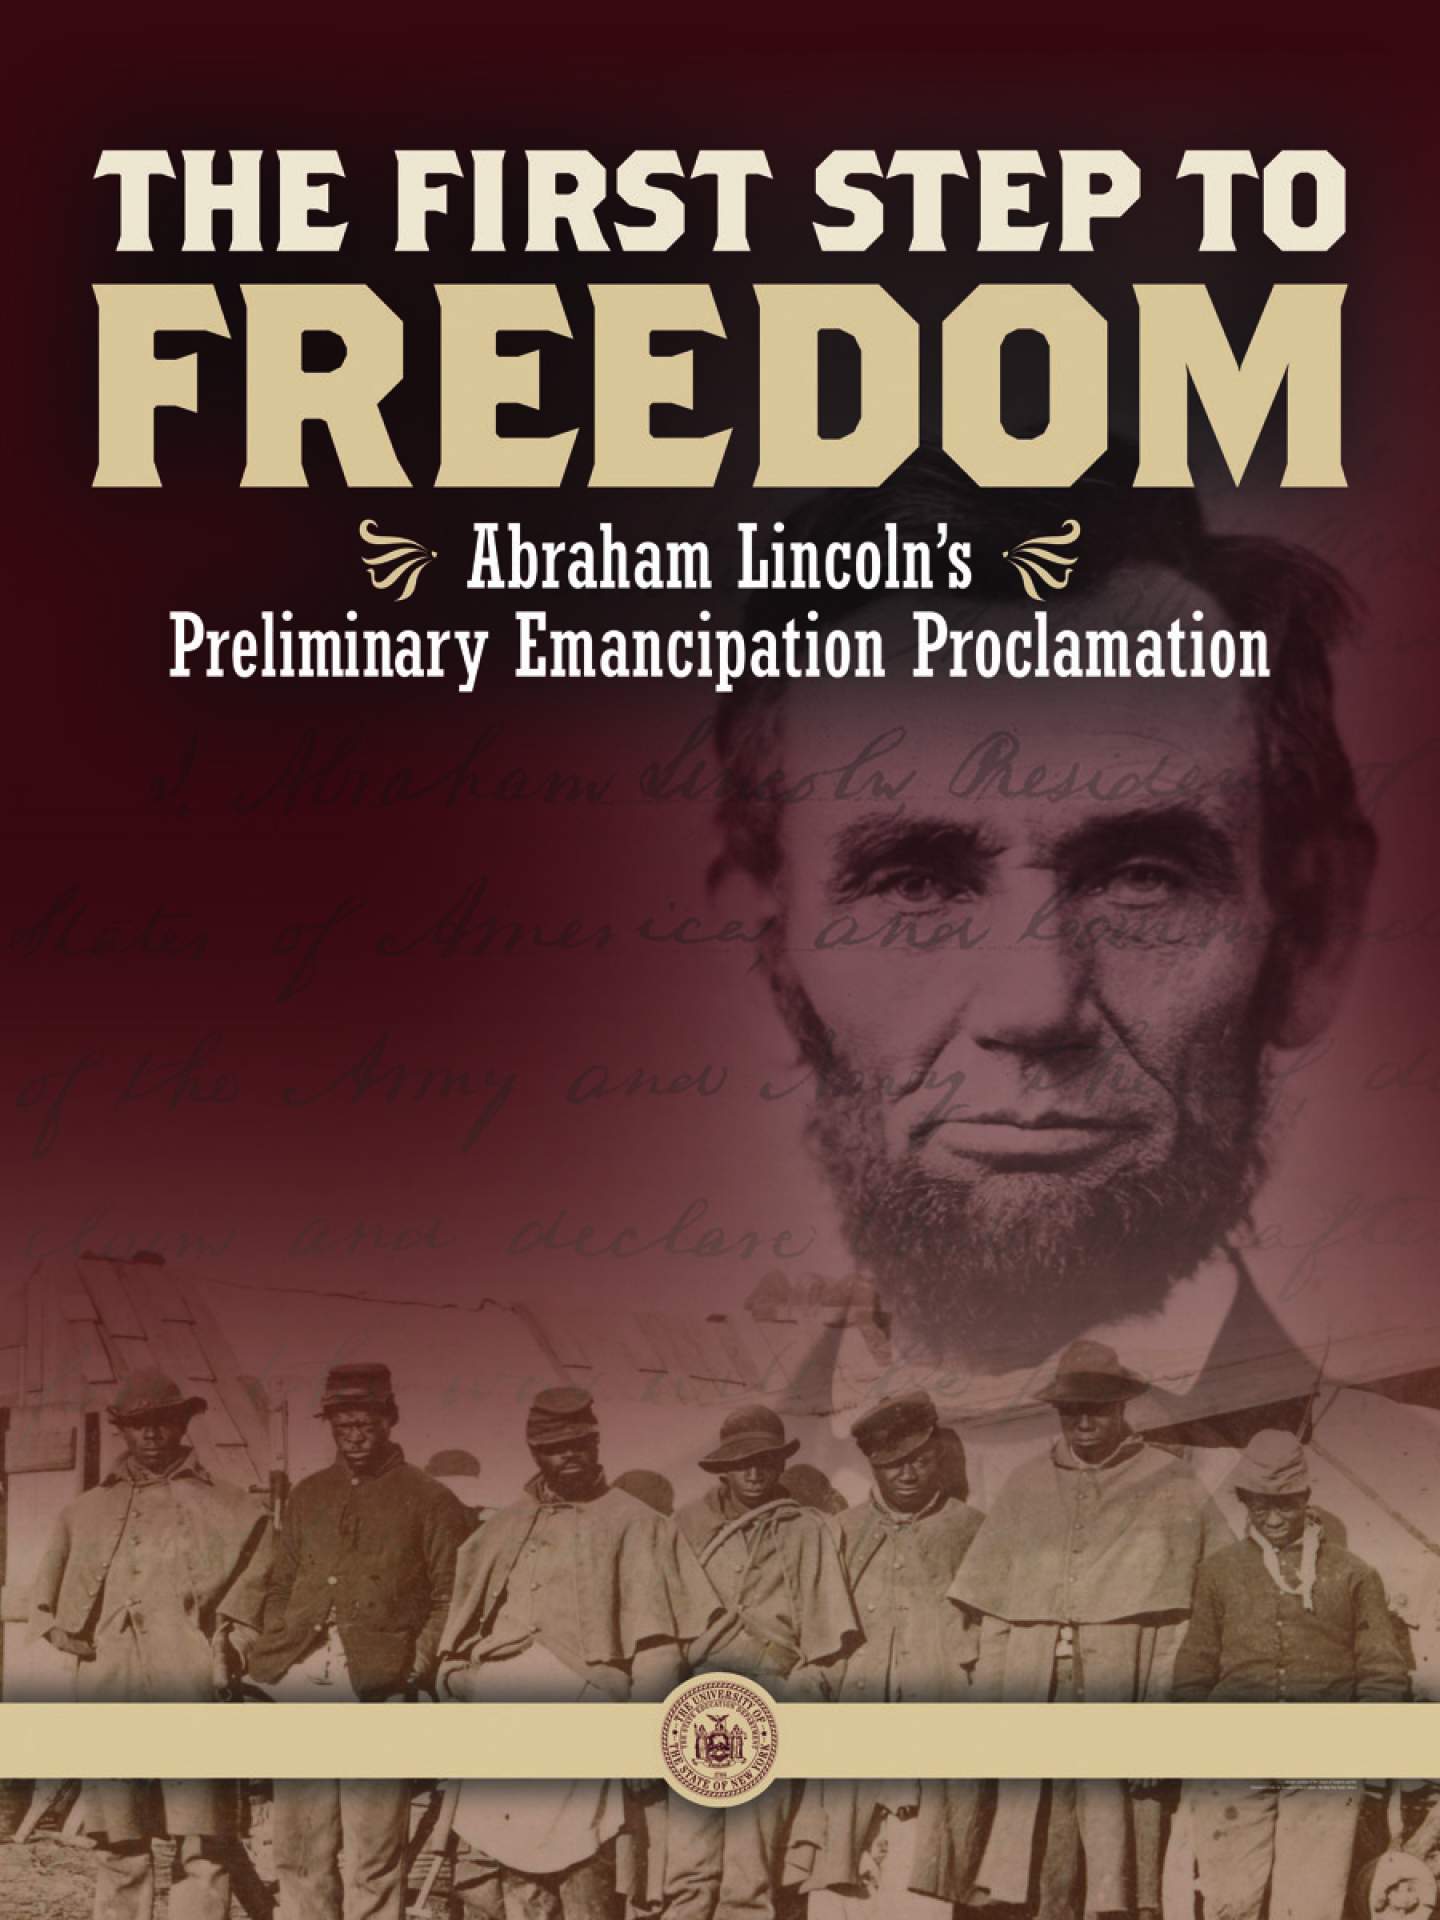 State Education Department Announces Exhibit Featuring Lincoln’s Preliminary Emancipation Proclamation